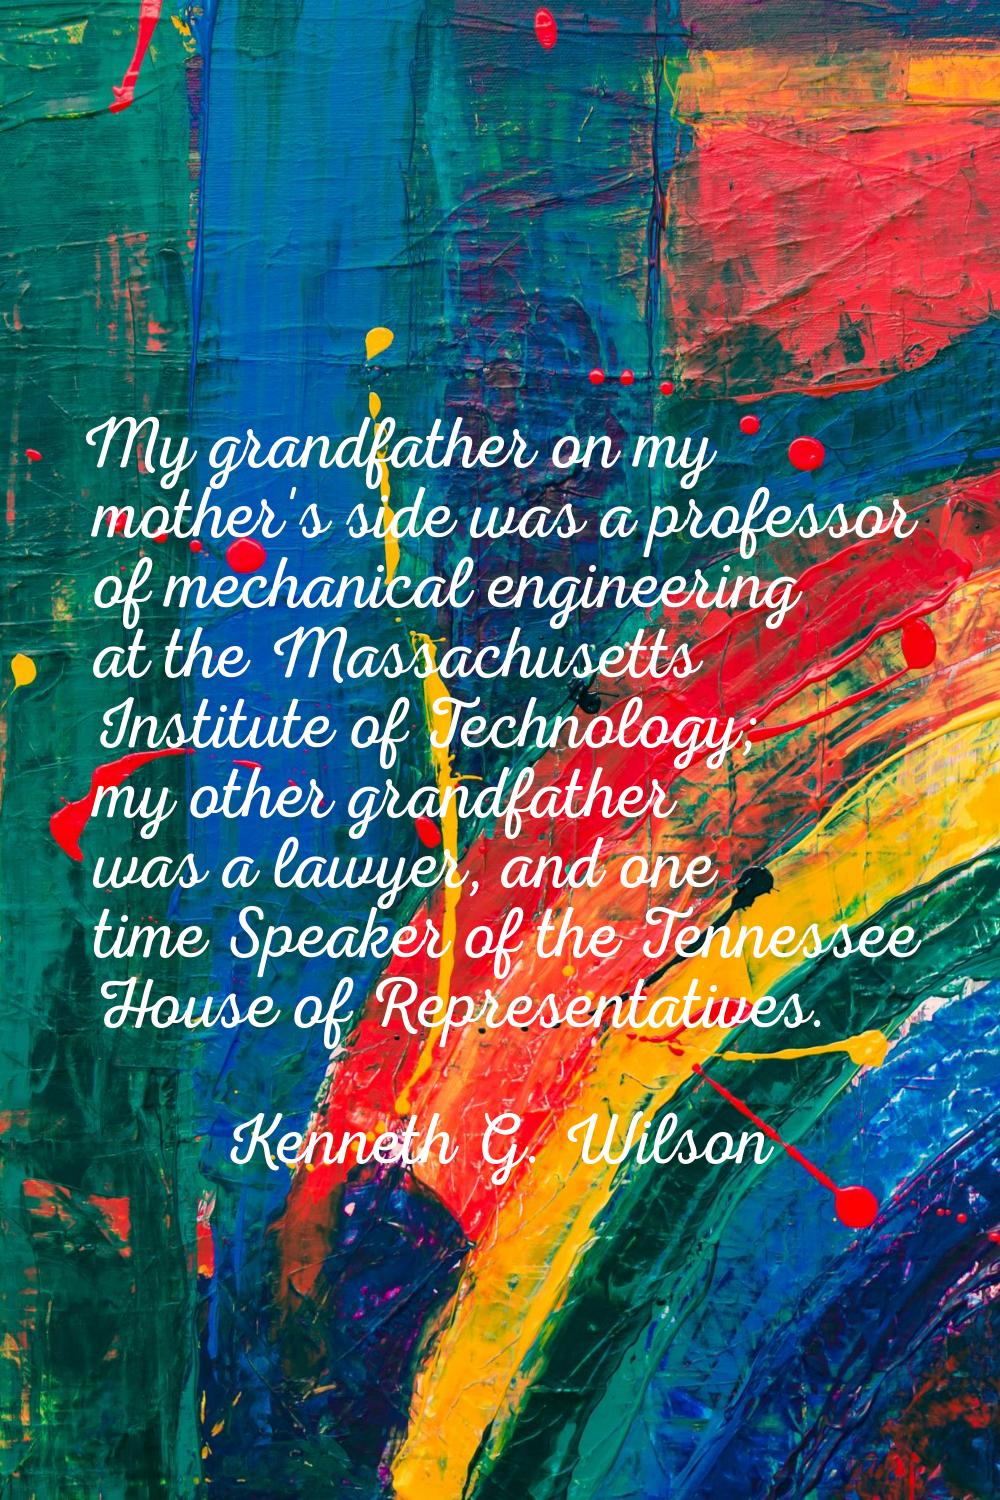 My grandfather on my mother's side was a professor of mechanical engineering at the Massachusetts I